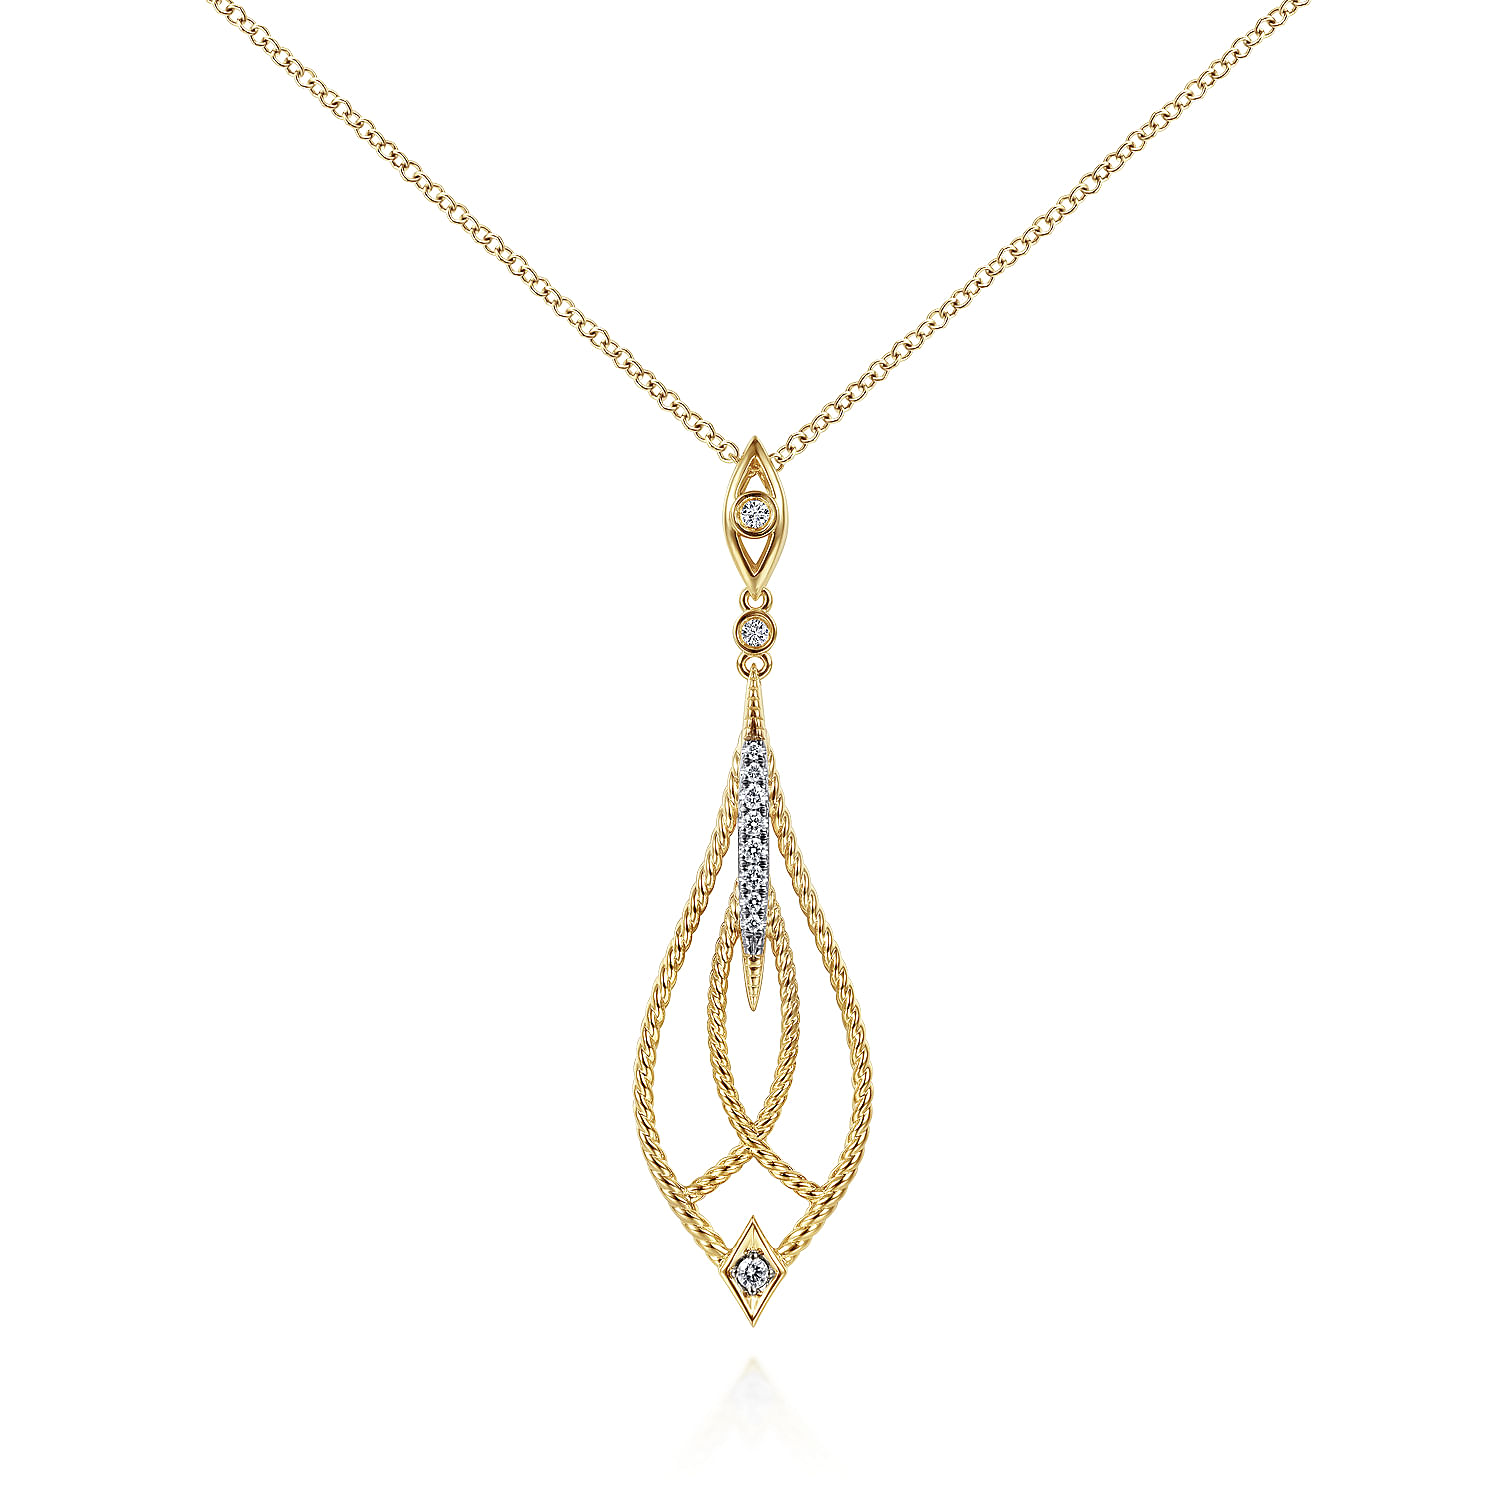 Gabriel - 14K Yellow Gold Open Teardrop Pendant Necklace with Diamond Accents